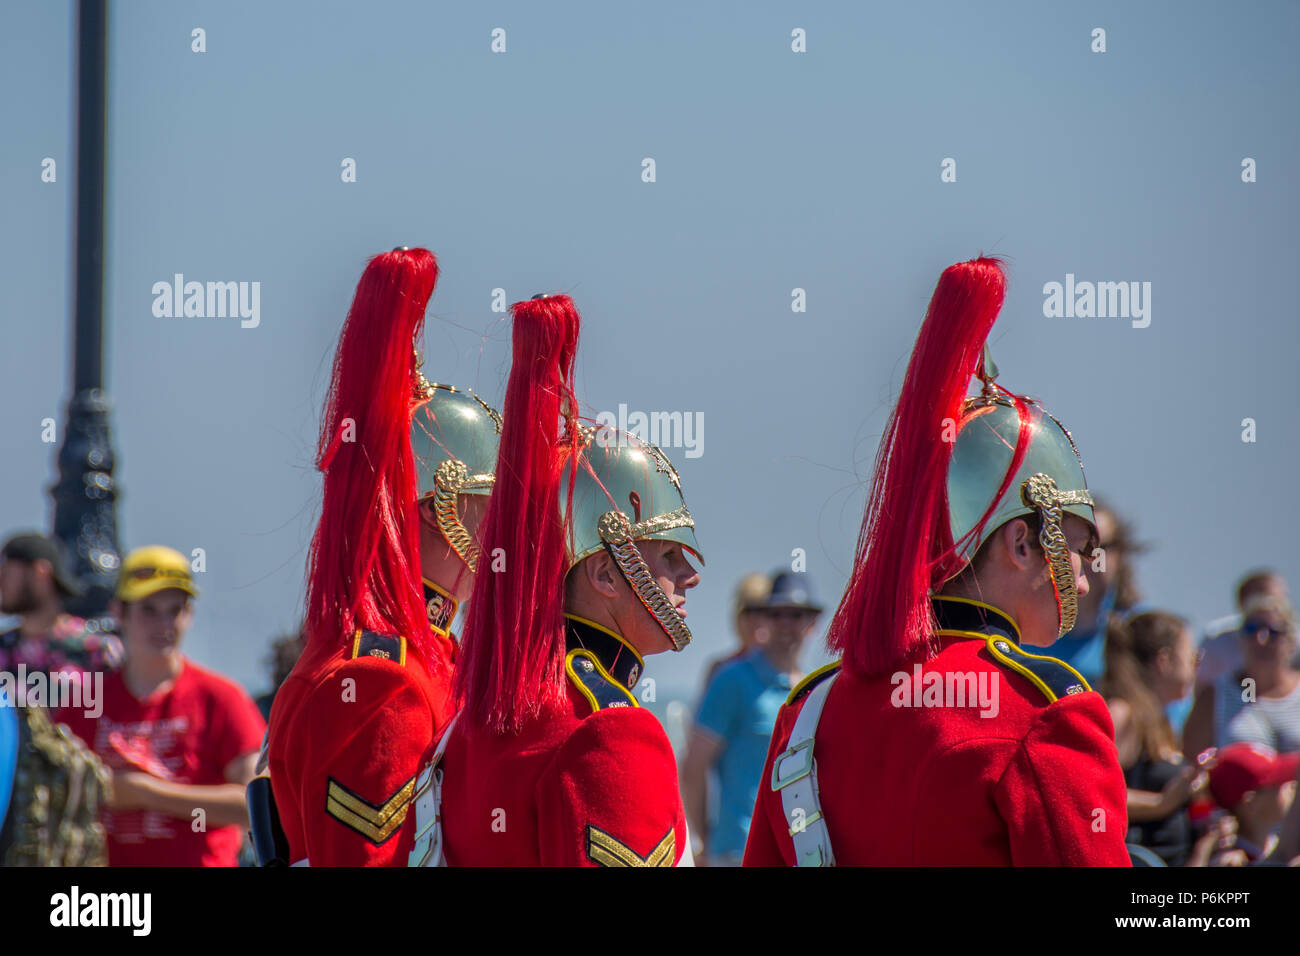 Armed Forces Day 2018 in Llandudno. Marching solders in red uniforms. A very hot day. soldiers sweating in uniform. Stock Photo